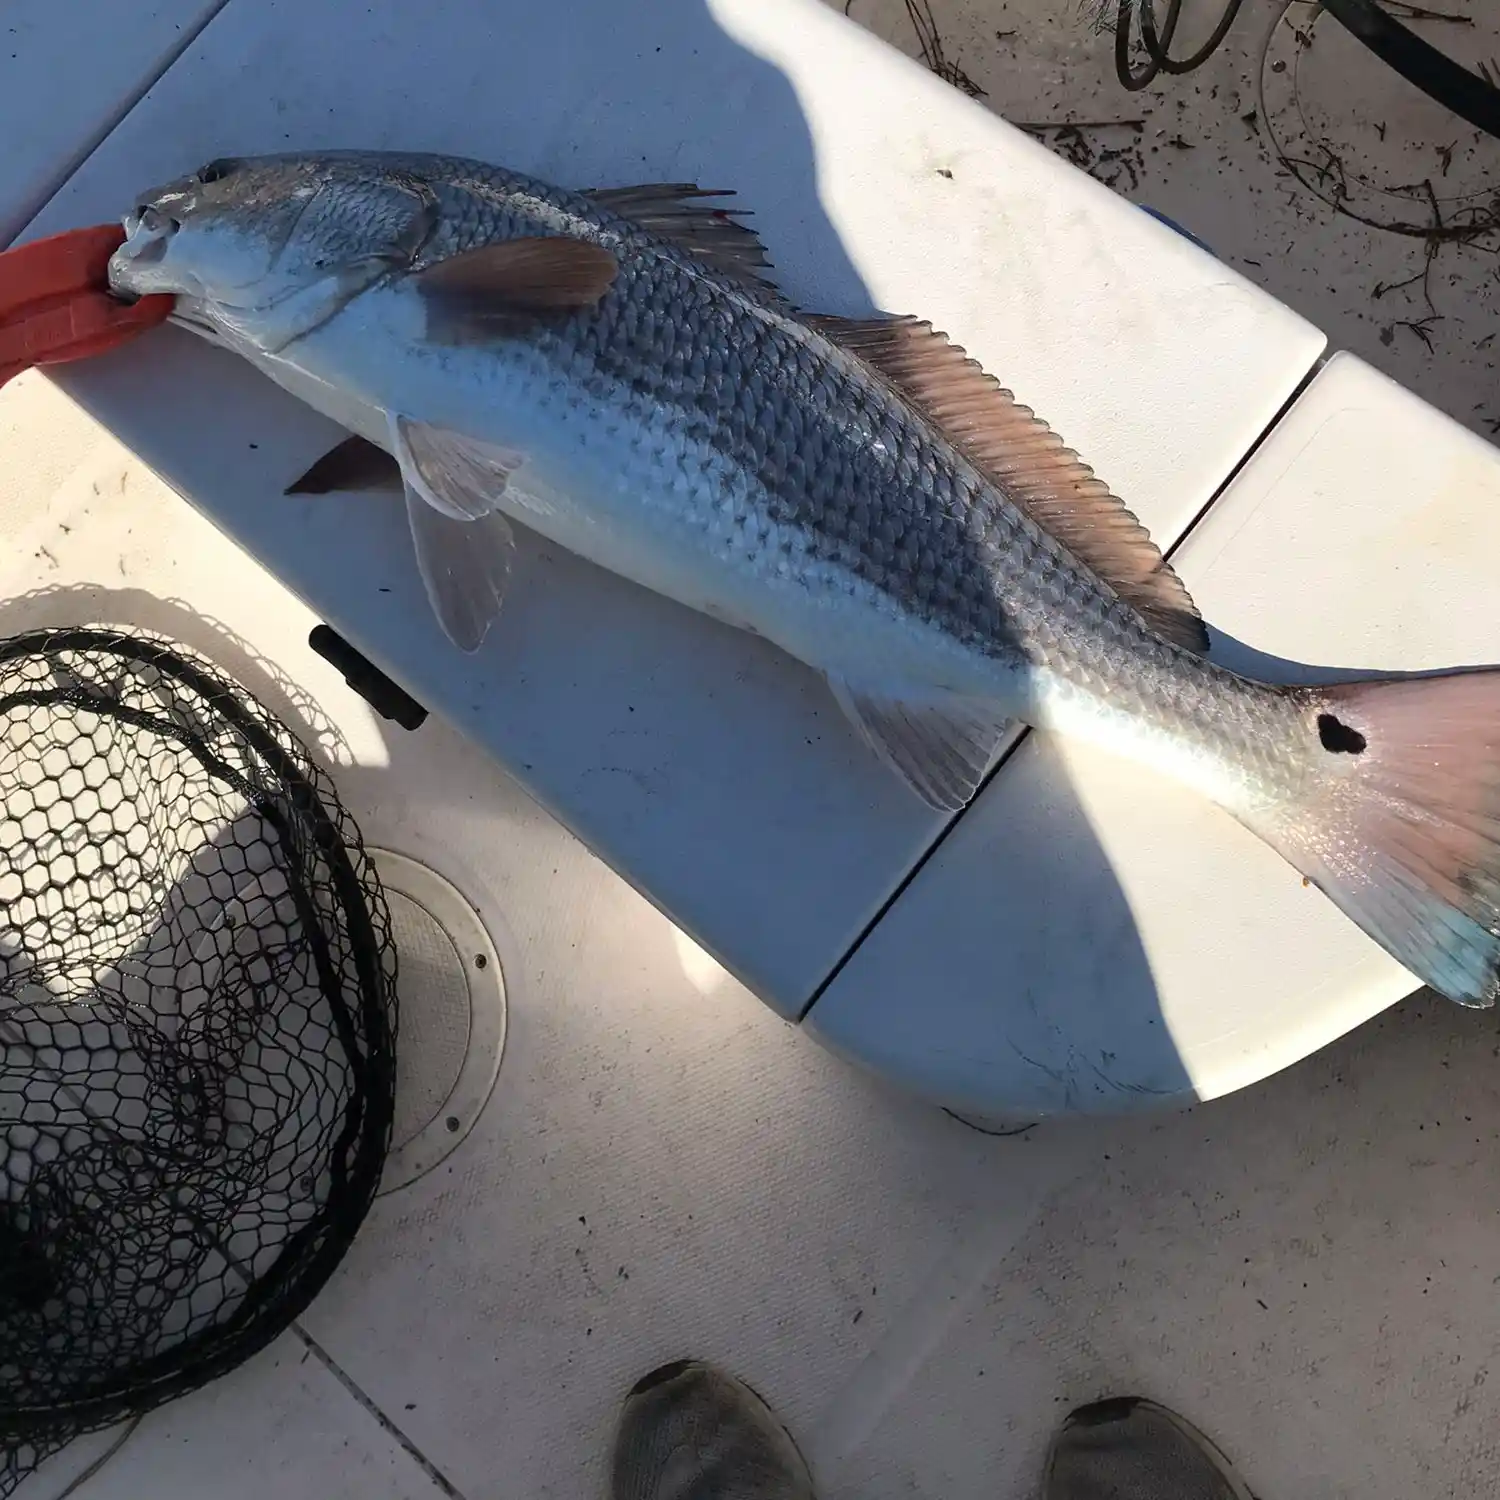 ᐅ Whale Branch fishing reports🎣• Port Royal, SC (United States) fishing